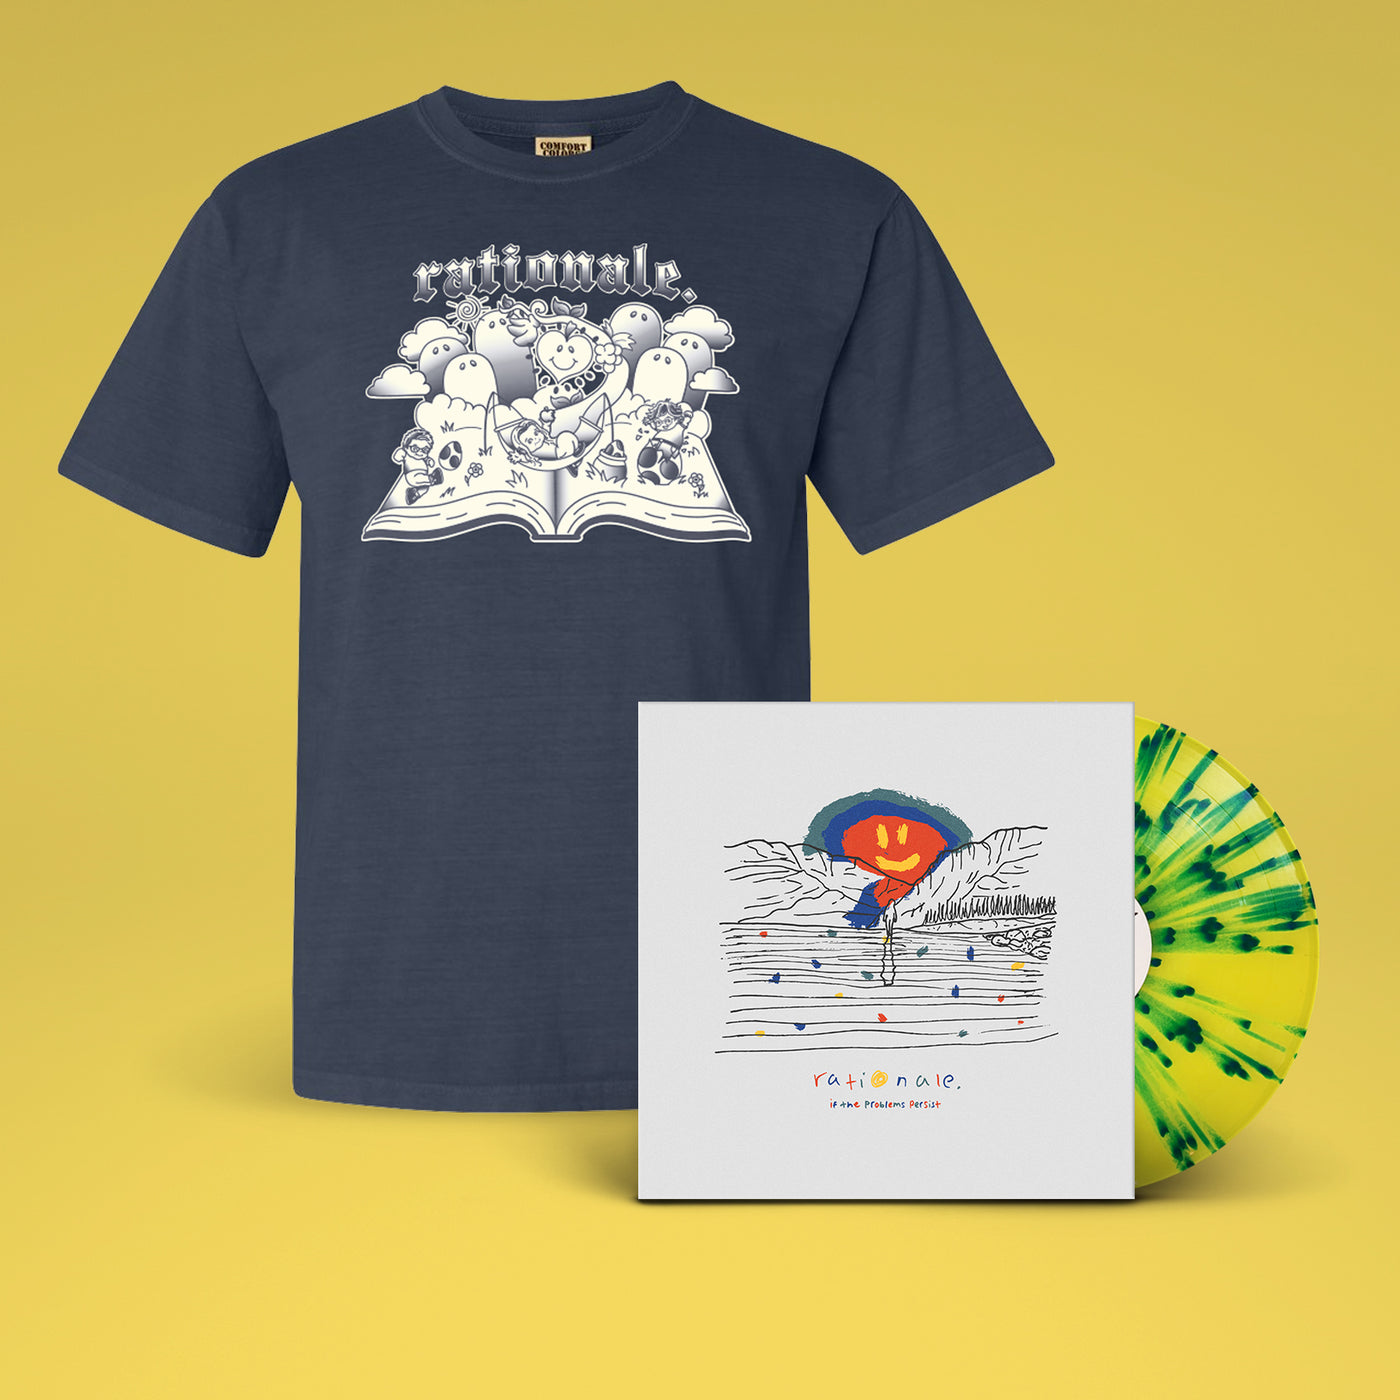 rationale. - If The Problems Persist LP + Cartoon Shirt